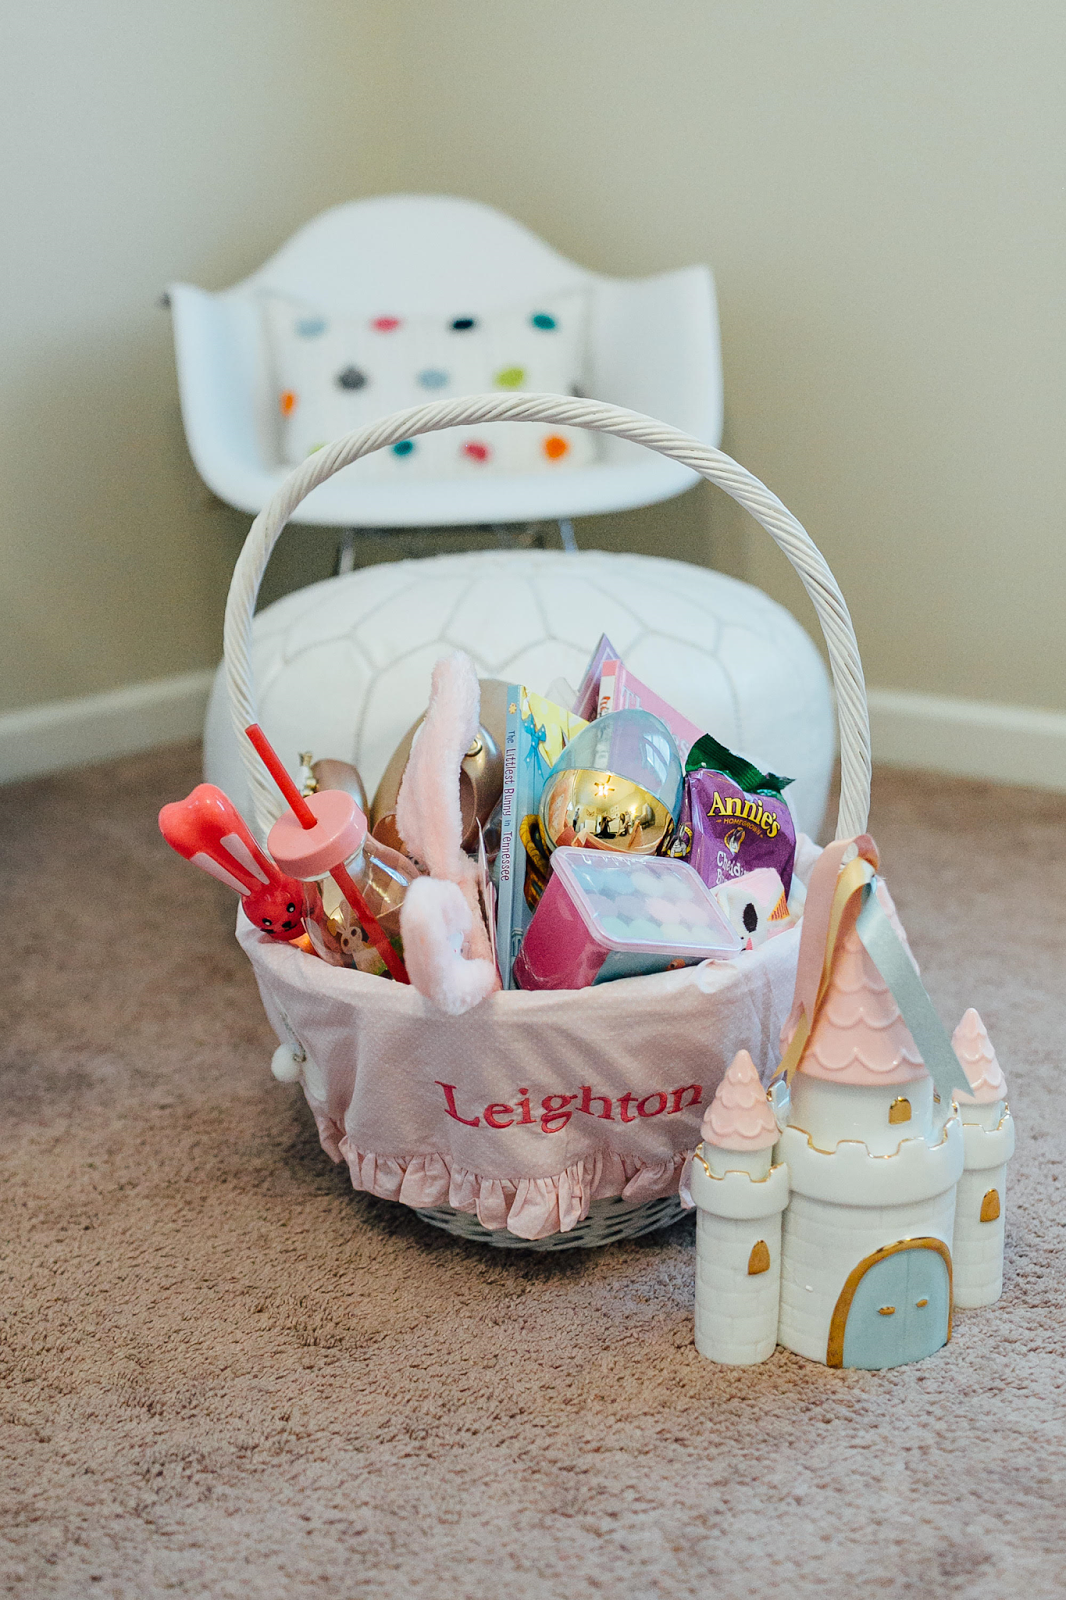 Non-Candy Easter Basket Ideas for Your Child by Laura from Walking in Memphis in High Heels